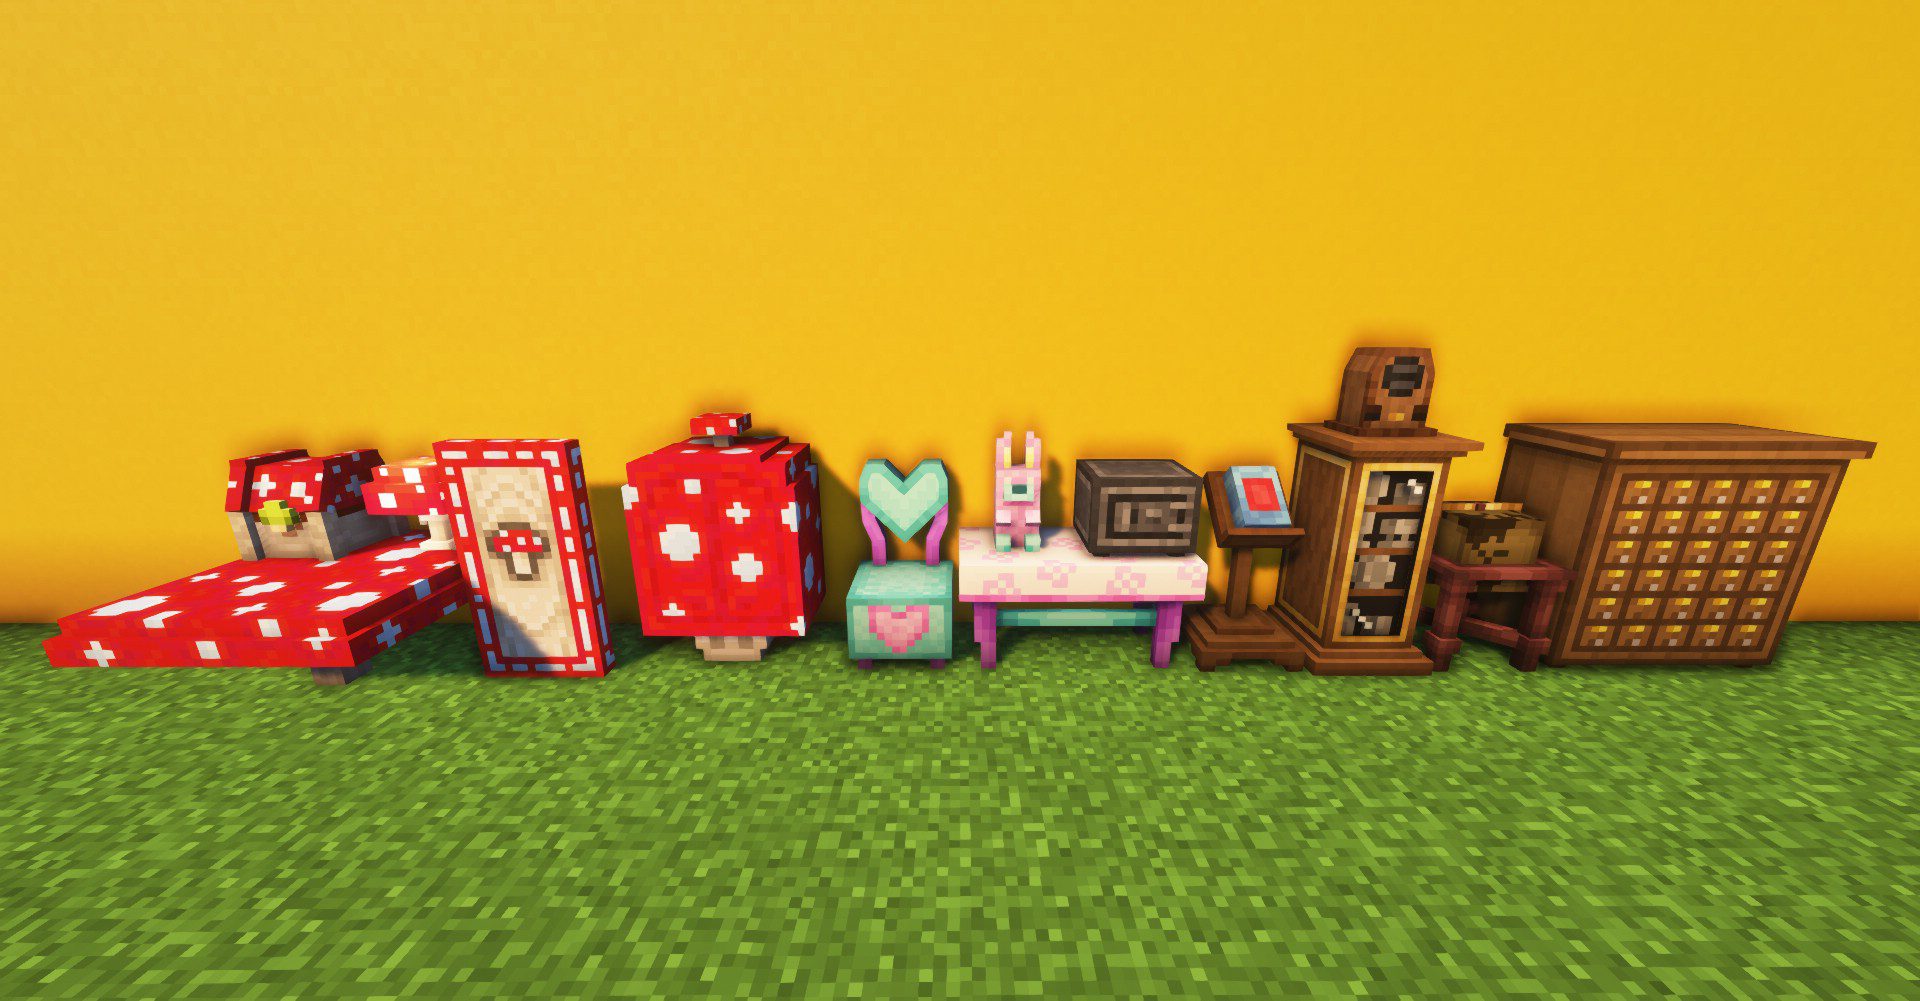 Cluttered Mod (, ) - Animal Crossing, The Sims 4, Starbound  Decor 